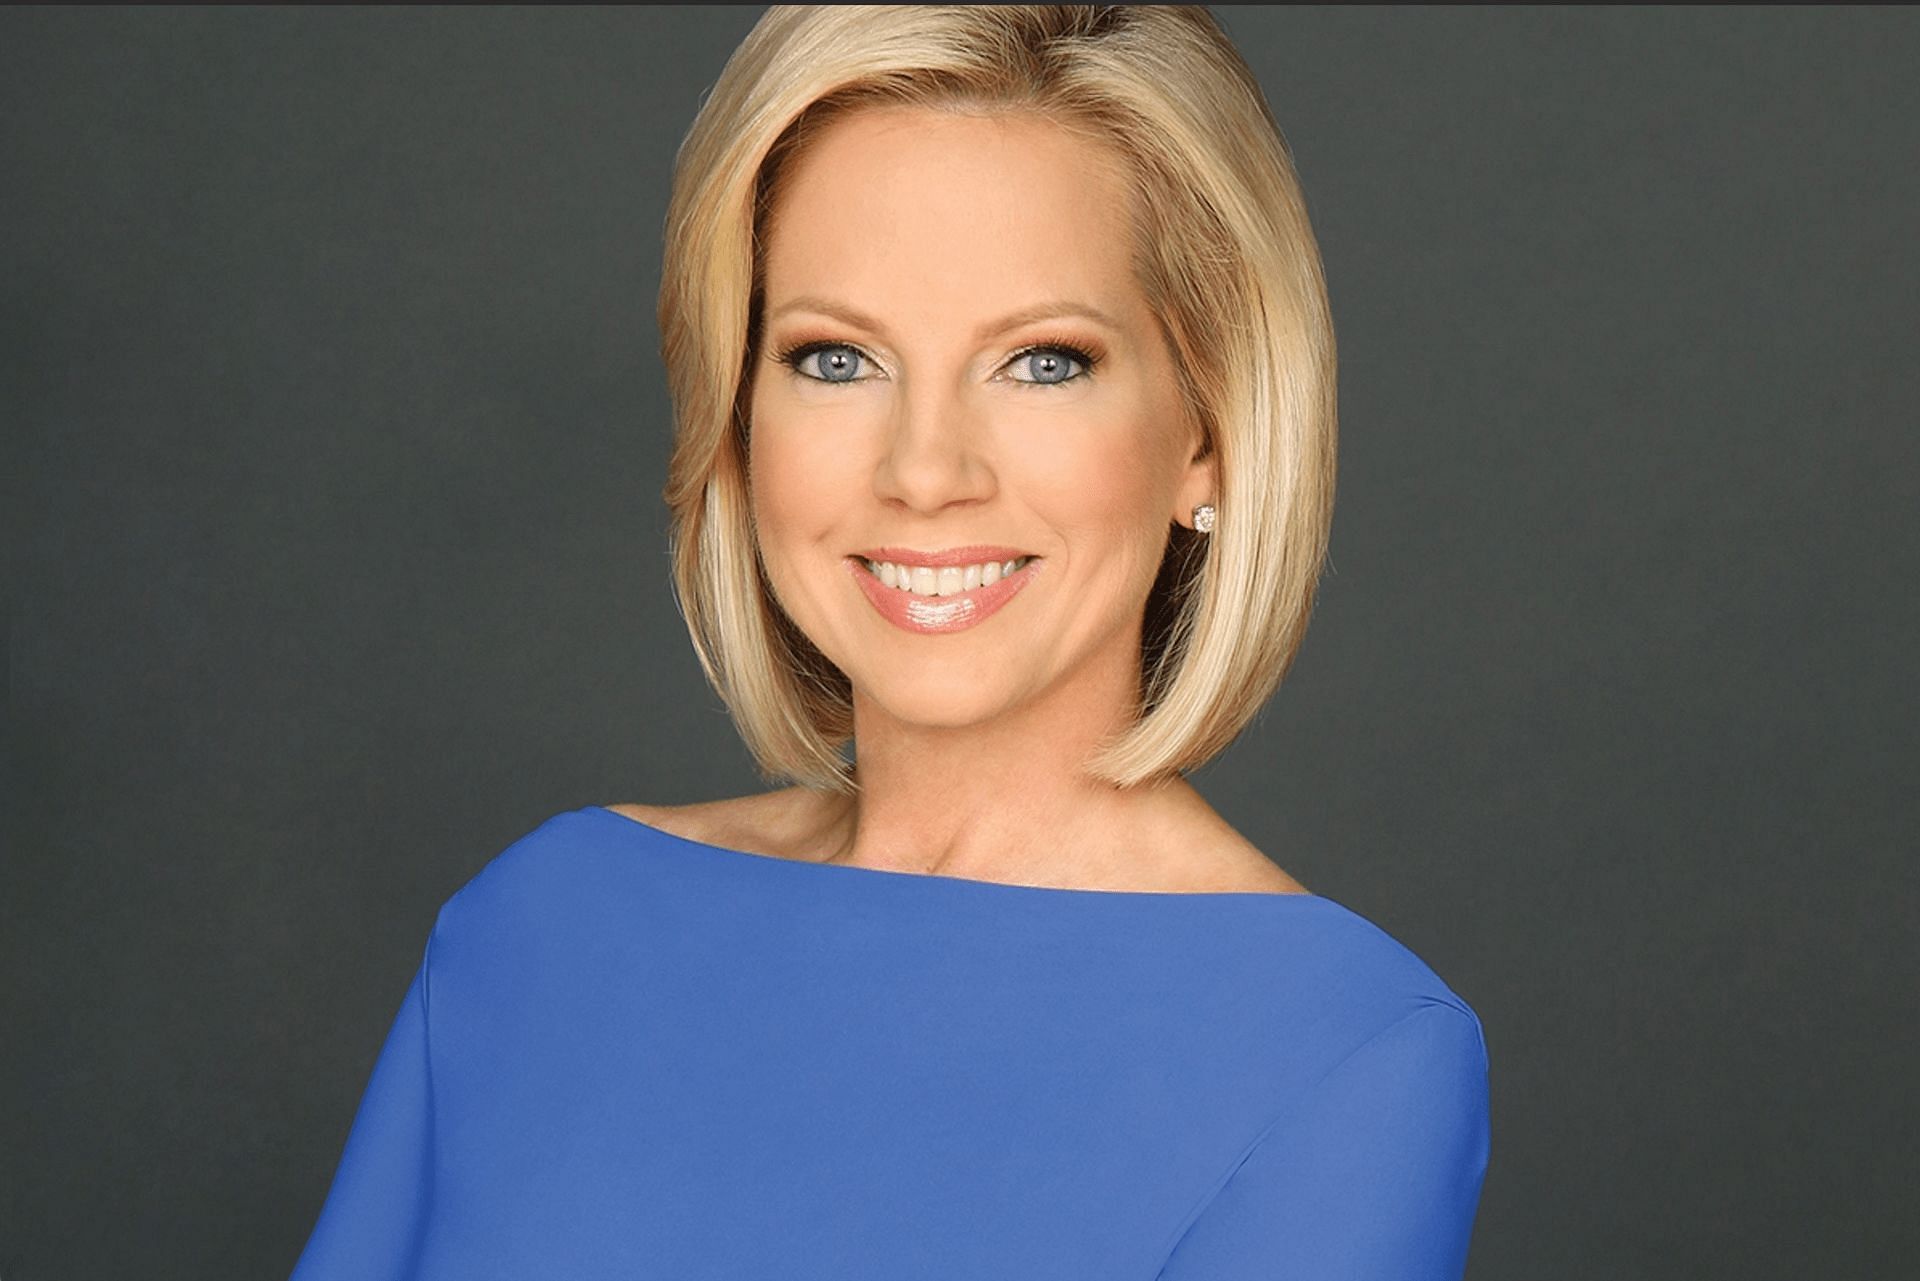 Shannon Bream replaces Chris Wallace on Fox News Sunday. (Image via Instagram)